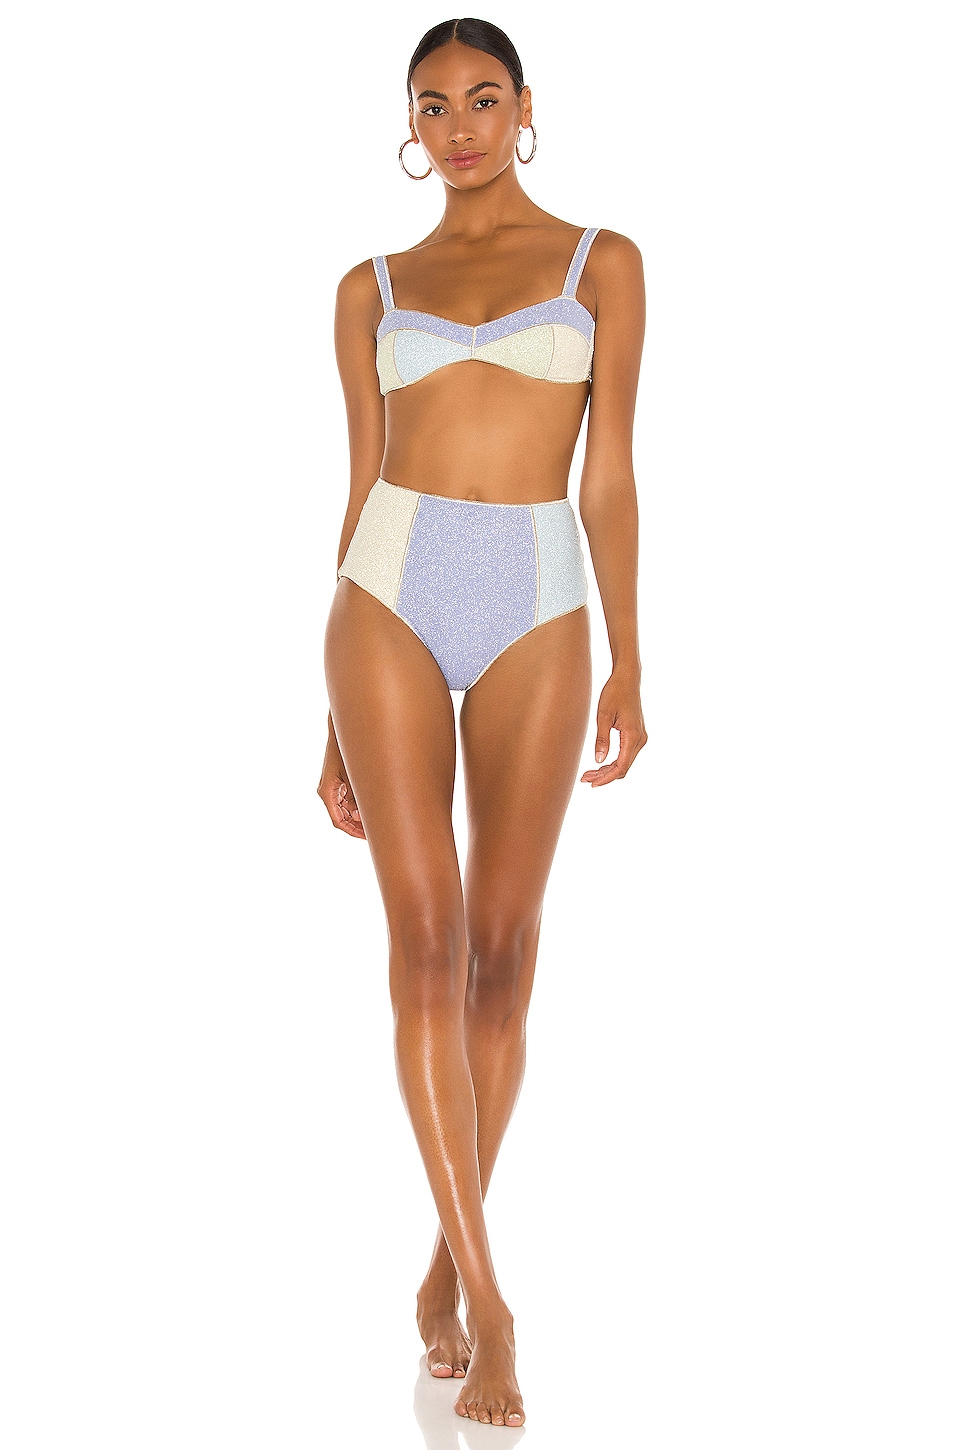 Swimwear Guide 2021: 42 Swimsuits in Every Style We Love | Who 